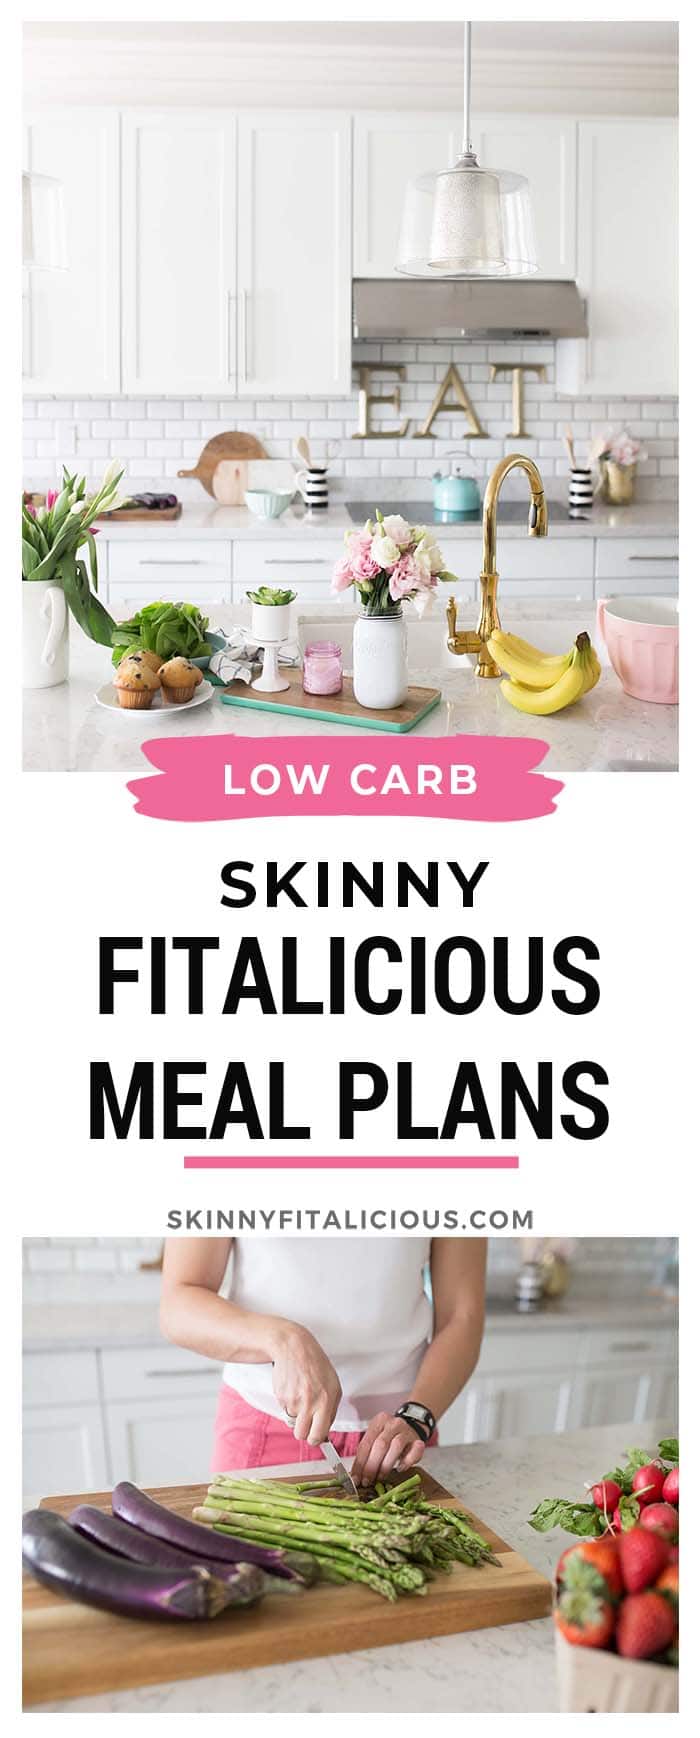 Skinny Fitalicious meal plans are low carb, high protein, designed for weight loss. Nutritionally balanced & made with real food to reduce sugar cravings.